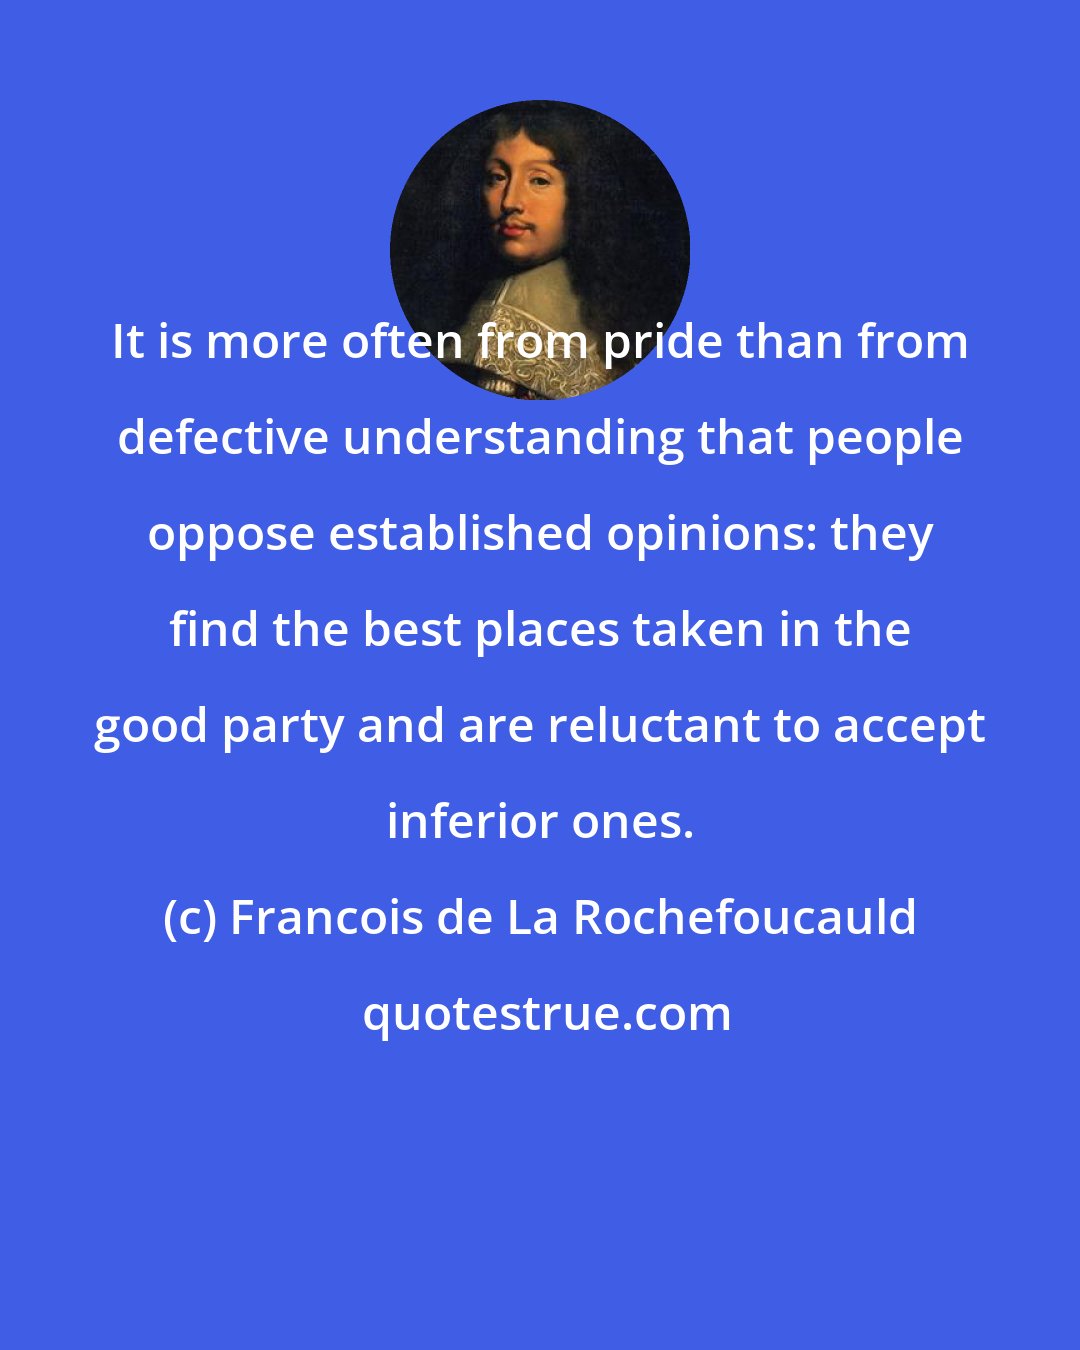 Francois de La Rochefoucauld: It is more often from pride than from defective understanding that people oppose established opinions: they find the best places taken in the good party and are reluctant to accept inferior ones.